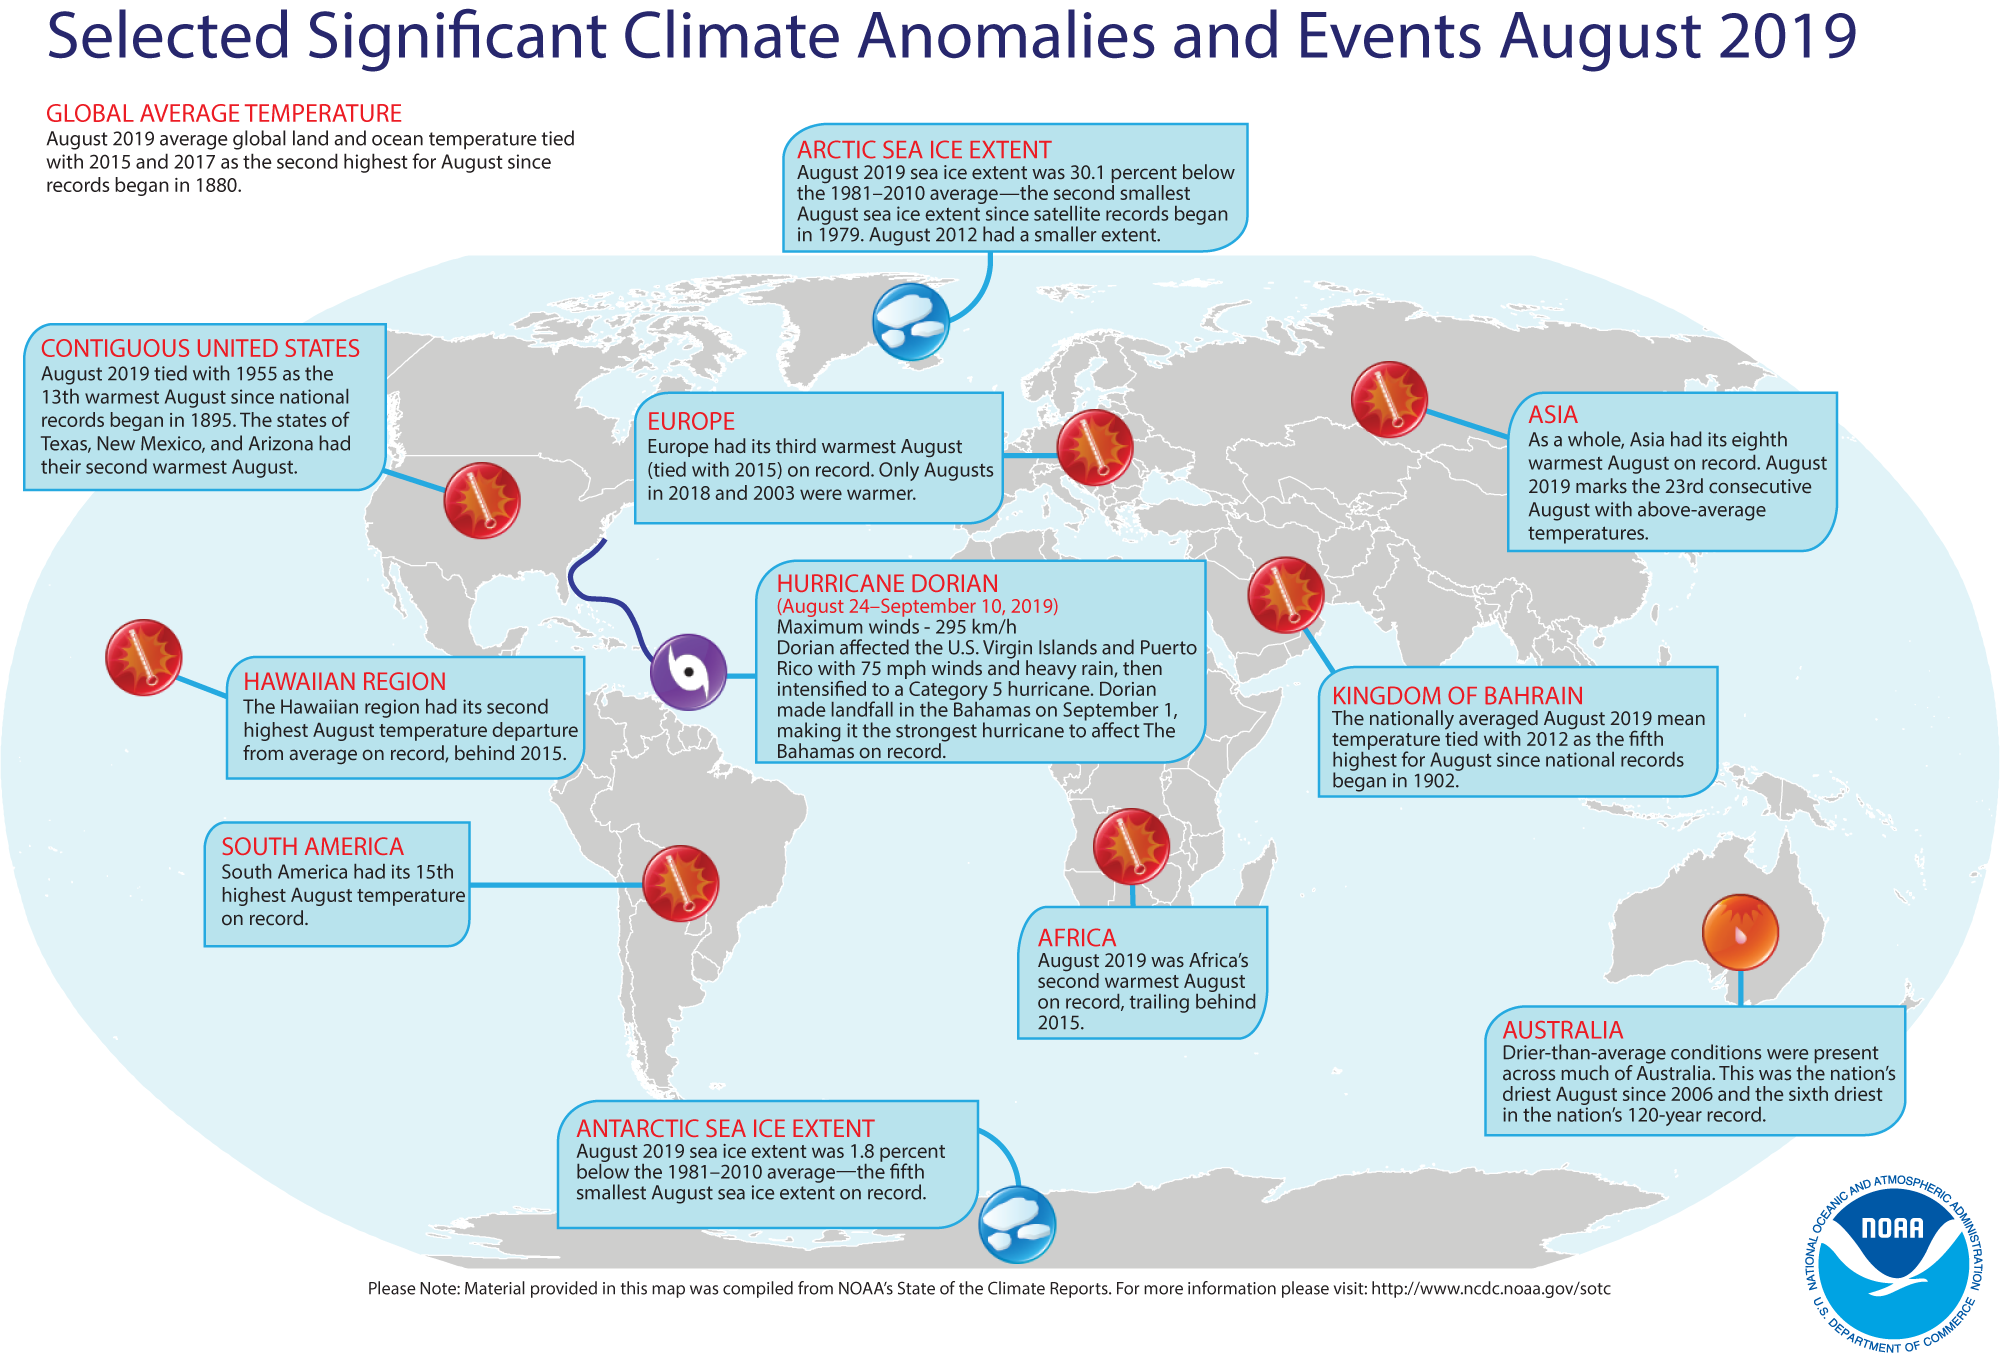 An annotated map of the world showing notable climate events that occurred around the world in August 2019. For details, see the short bulleted list below in our story.